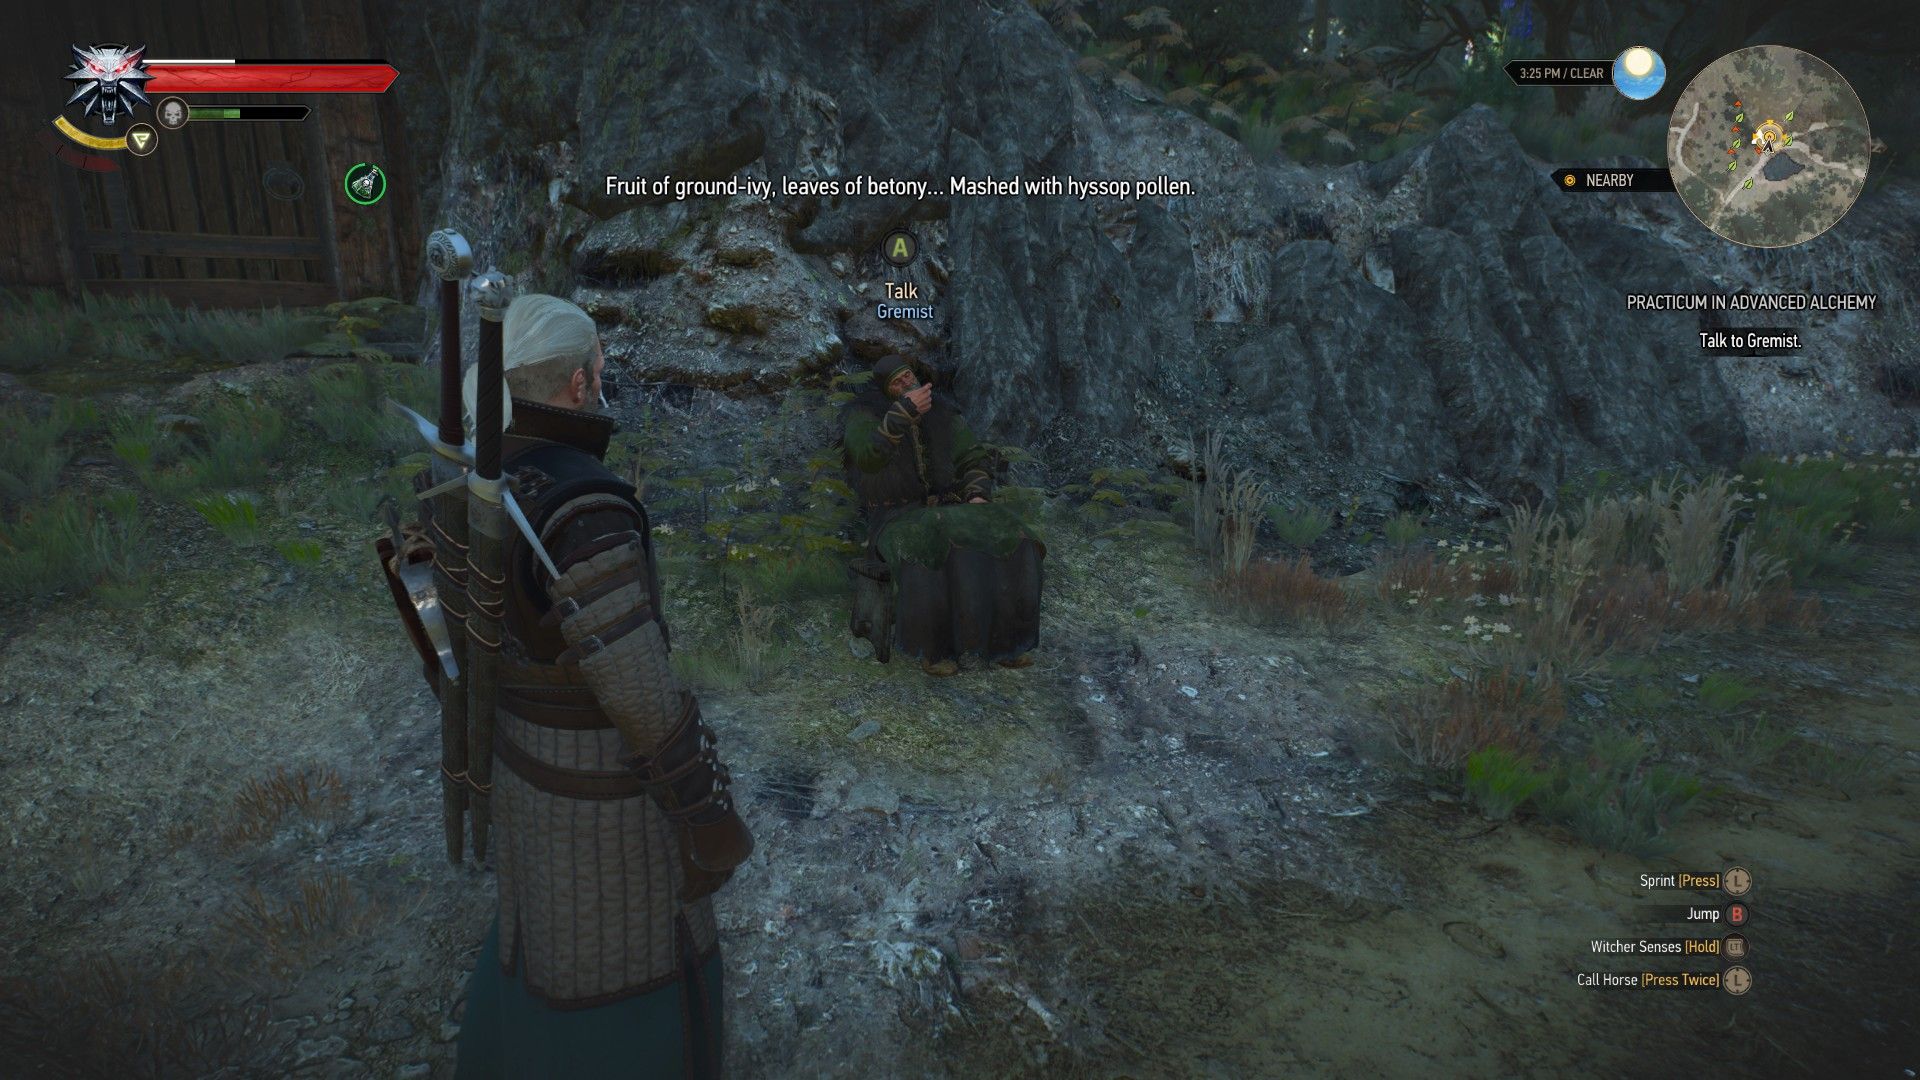 Geralt hears an old coot standing outside the cave complaining about the world.